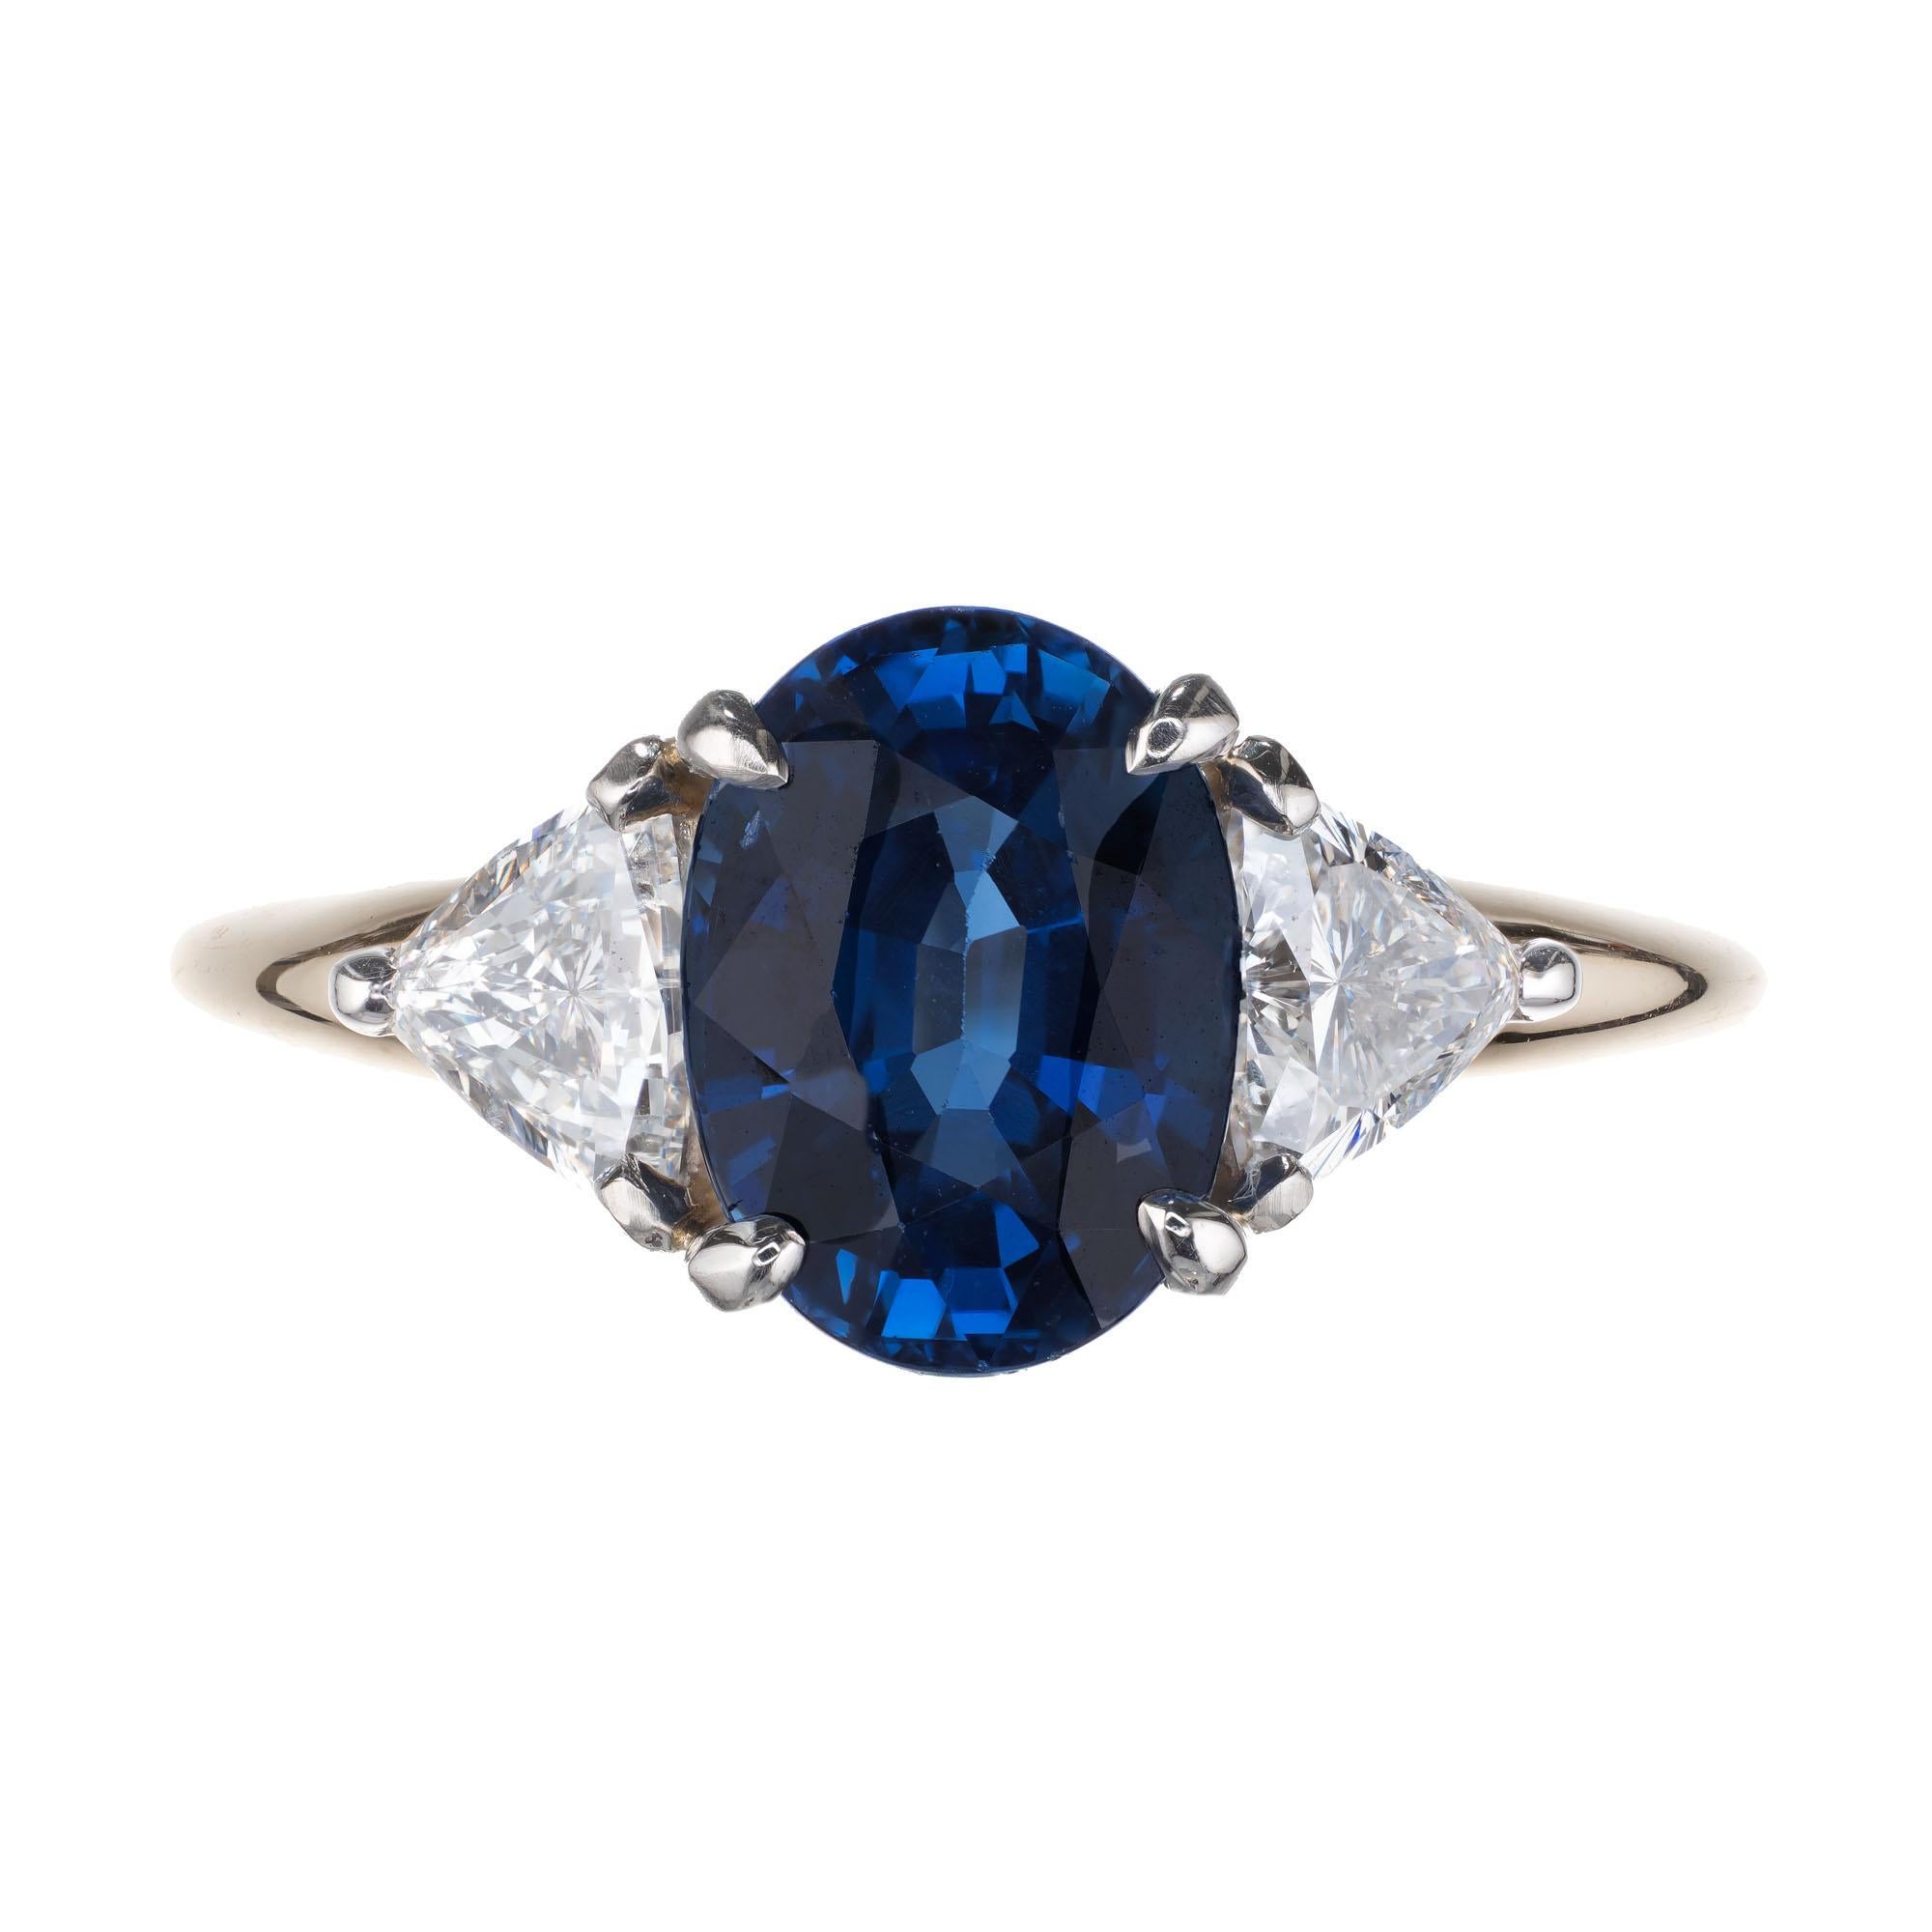 Oval sapphire and diamond engagement ring. GIA certified sapphire in an 18k yellow three-stone setting with two trilliant accent diamonds.  GIA certified.  

1 oval cut blue sapphire SI, approx. 2.62cts GIA certificate # 2205572231
2 trilliant cut